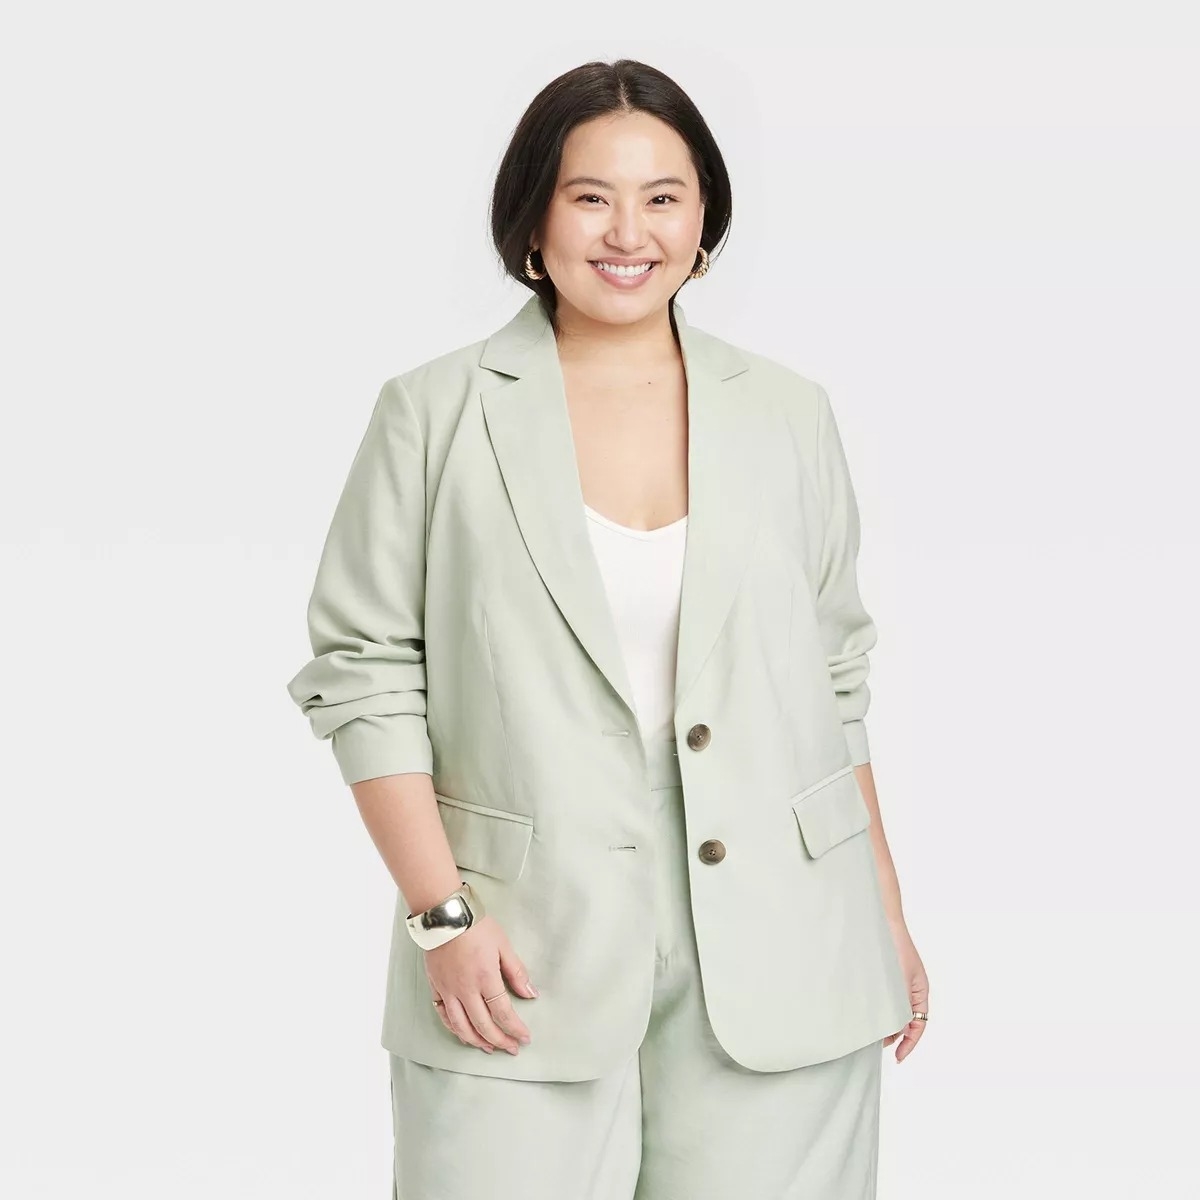 model in a casual light blazer and trousers with a white top, posing with hands in pockets